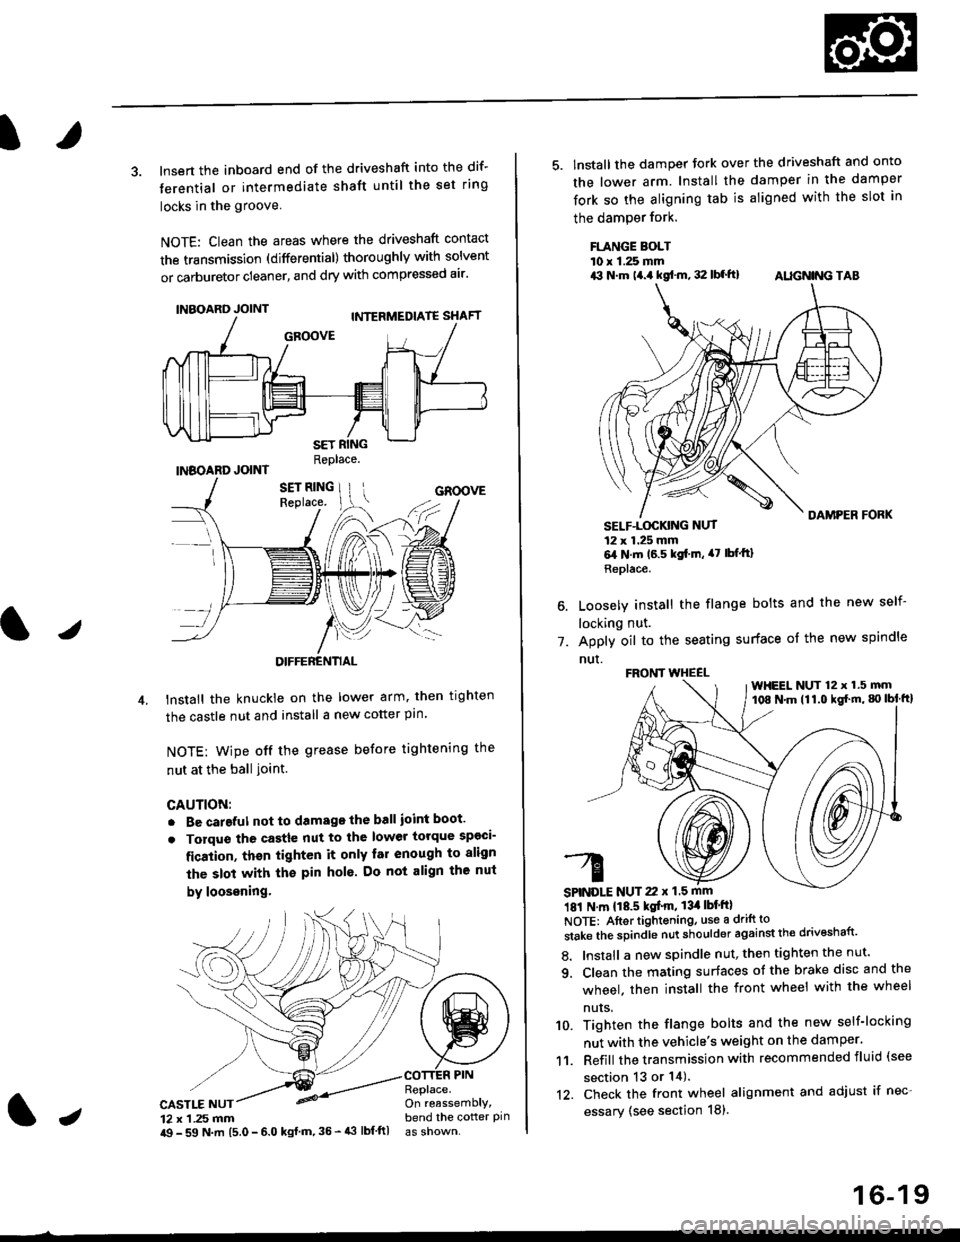 HONDA CIVIC 2000 6.G Workshop Manual 3. lnsert the inboard end of the driveshaft into the dif-
terential or intermediate shaft until the set ring
locks in the groove
NOTE: Clean the areas where the driveshaft contact
the transmission (di